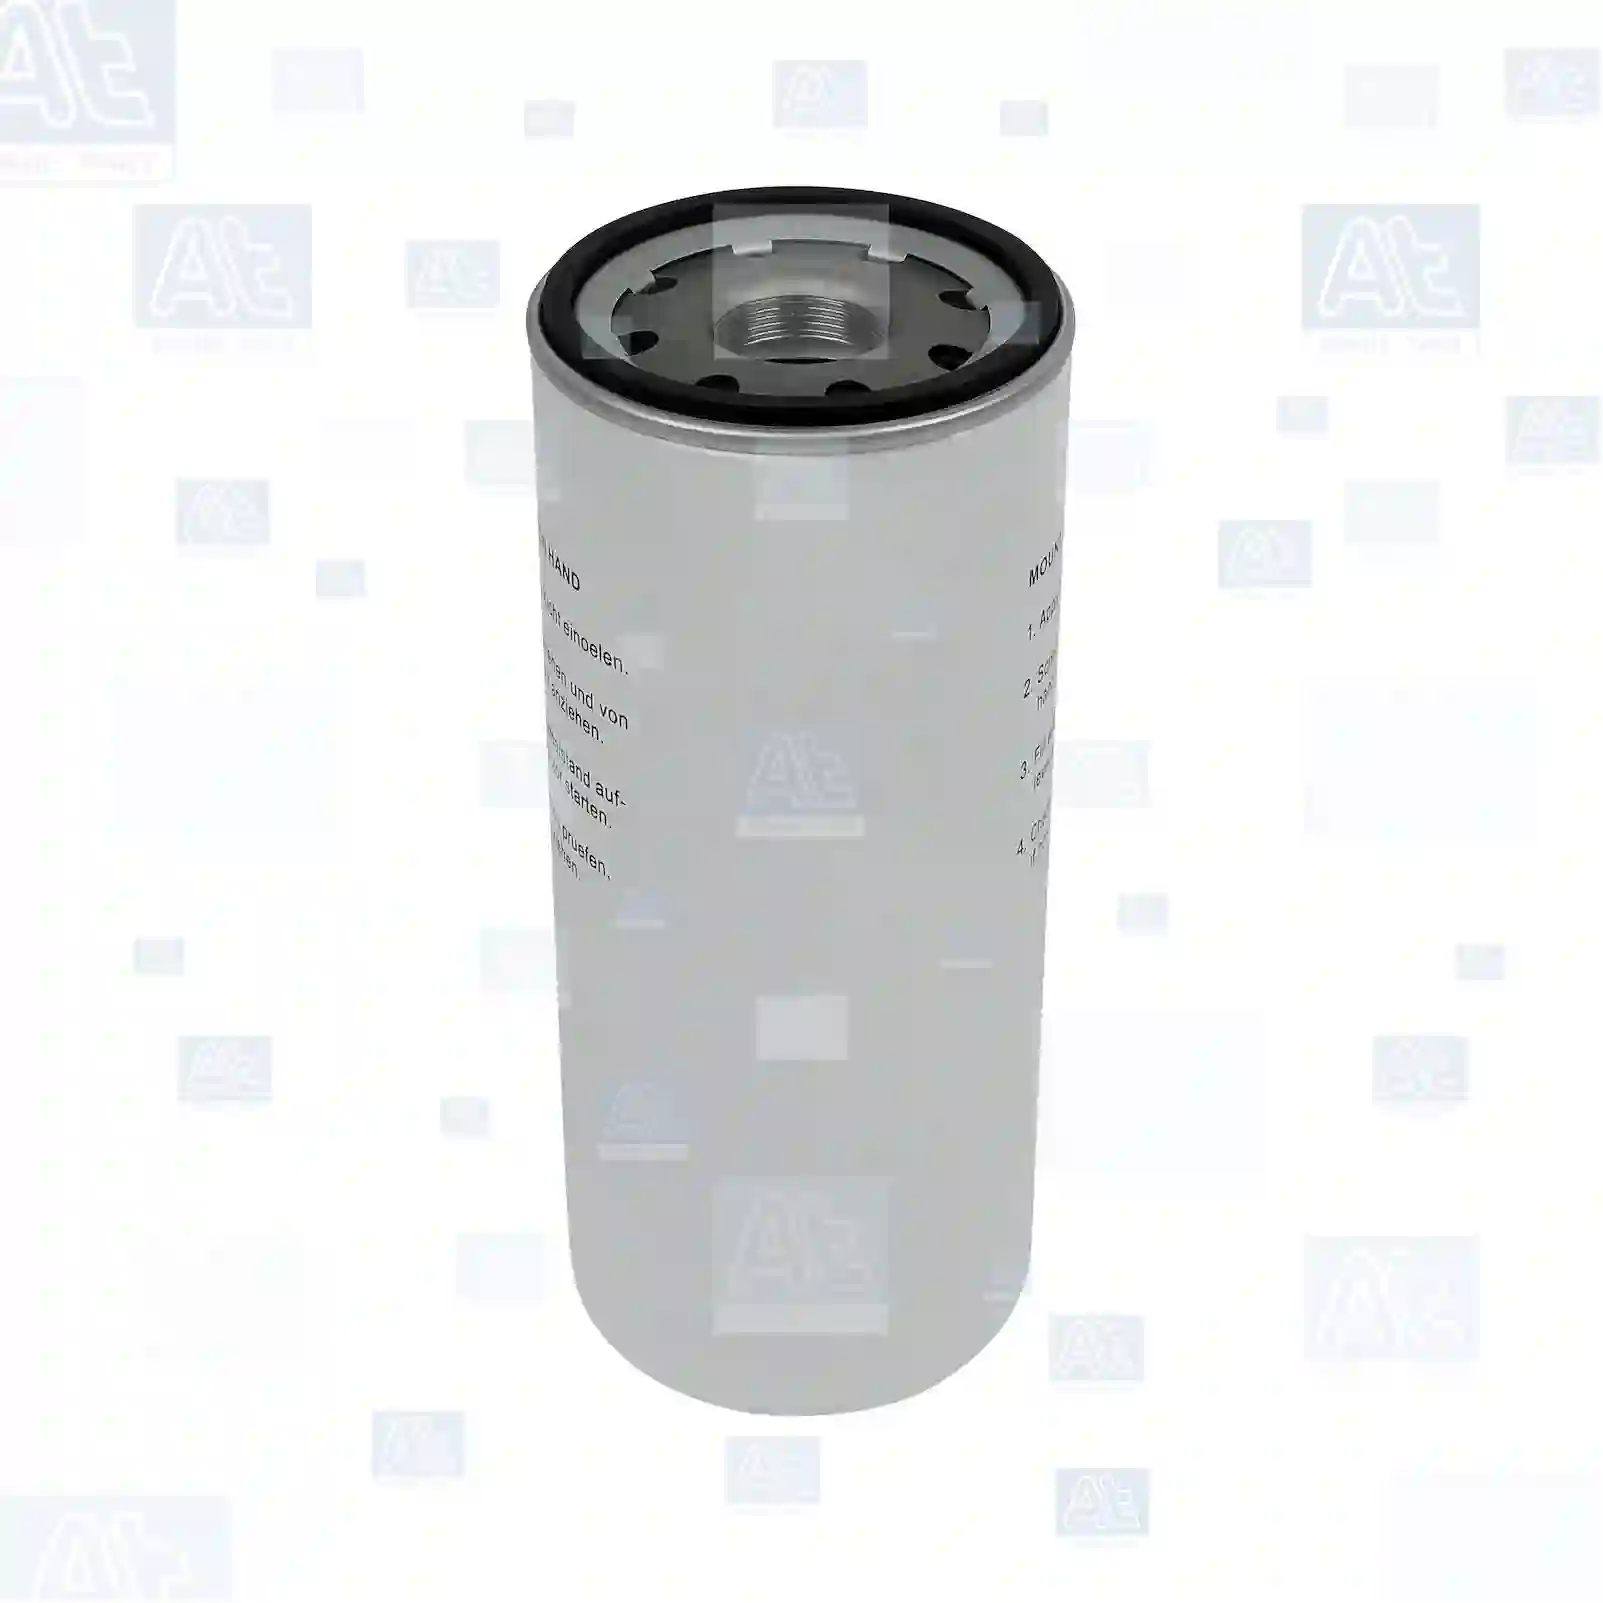 Engine Oil filter, at no: 77700267 ,  oem no:4322701, 74322701, 11421763296, 1212621H1, 150521, 3136406R91, 3313283, 572498C1, 901158T1, 905411880008, K150521KC, PO015521KC, 1W-4845, 1W-8845, 226-6554, 229-6554, 3I-1206, 7C-4228, 9Y-4468, 9Y-4524, 0013022760, 0013022761, 3021658, 3303242, 3304232, 3309637, 3312287, 3313283, 3313284, 3313289, 3889311, BBU8333, BBU9687, 23530413, 00548974, 692306, 901000, 01181749, 01183574, 605411880008, 1356344, C3304232, 0746870, 04322701, 61259040, 700703332, 71455205, 73124135, 74322701, 76604059, Y03422604, Y03426604, Y03723200, Y08552602, 3313283, 57124, 6130864, ABPN10GLF777, DNP550777, 15587320, 2054371, 2054377, 23518672, 25011187, 25011188, 25177018, 5266845, 15587320, 2054371, 2054377, 23518672, 25011187, 25011188, 5266845, 9975220, 194939128, 156071420, 156071421, 156071440, 156071760, 156071790, 156072040, 1878116392, 4175913, 41759131, 4204048, 42040481, 4285964, 42859641, 4371313, 4379562, 4380540, 4429727, 4448735, 4470167, 71455205, 76590121, AR98330, H3754002100, L4175913, RE42051, 1212621H1, 572498C1, 1-13240067-0, 1-13240103-0, 1-13240131-0, 1-13240163-0, 1-13240163-2, 1-13240209-0, 2-90654830-0, 5000812484, AR21748, AR98330, PMLF777, RE21748, RE42051, KW77, KW777, L275, 5604365, 20843764, 20845764, 21707135, 2191P550425, 2191P550777, 55505504007, 3632567M1, 771308M1, 771308M2, 3754002100, 3754002100D, 3754002100E, ME034879, 00057124, 00V57124, 01350561, 86546626, 52211-70573, 52217-06532, 1220526, 1220703, 1220777, 122077700, PB777, B1350561, K150521, K850588, V850559, 5000682148, 5000812484, 5001846647, 7420430751, 7420541379, 7421561284, 7423114217, LUS3921, 5502096, 1216400531, 836340713, 15267514, 152009Z00B, 5221170573, 5221706532, 119962280, 11996228, 119962280, 129694576, 12978467, 21170573, 21707132, 27872, 3130924, 3131750, 40412306, 4041330, 40413306, 471392, 4713921, 471393, 4713982, 477556, 4775565, 60477556, 8121109, 85114048, 963023, 991213283, 85660, 172015777, ZG01699-0008 At Spare Part | Engine, Accelerator Pedal, Camshaft, Connecting Rod, Crankcase, Crankshaft, Cylinder Head, Engine Suspension Mountings, Exhaust Manifold, Exhaust Gas Recirculation, Filter Kits, Flywheel Housing, General Overhaul Kits, Engine, Intake Manifold, Oil Cleaner, Oil Cooler, Oil Filter, Oil Pump, Oil Sump, Piston & Liner, Sensor & Switch, Timing Case, Turbocharger, Cooling System, Belt Tensioner, Coolant Filter, Coolant Pipe, Corrosion Prevention Agent, Drive, Expansion Tank, Fan, Intercooler, Monitors & Gauges, Radiator, Thermostat, V-Belt / Timing belt, Water Pump, Fuel System, Electronical Injector Unit, Feed Pump, Fuel Filter, cpl., Fuel Gauge Sender,  Fuel Line, Fuel Pump, Fuel Tank, Injection Line Kit, Injection Pump, Exhaust System, Clutch & Pedal, Gearbox, Propeller Shaft, Axles, Brake System, Hubs & Wheels, Suspension, Leaf Spring, Universal Parts / Accessories, Steering, Electrical System, Cabin